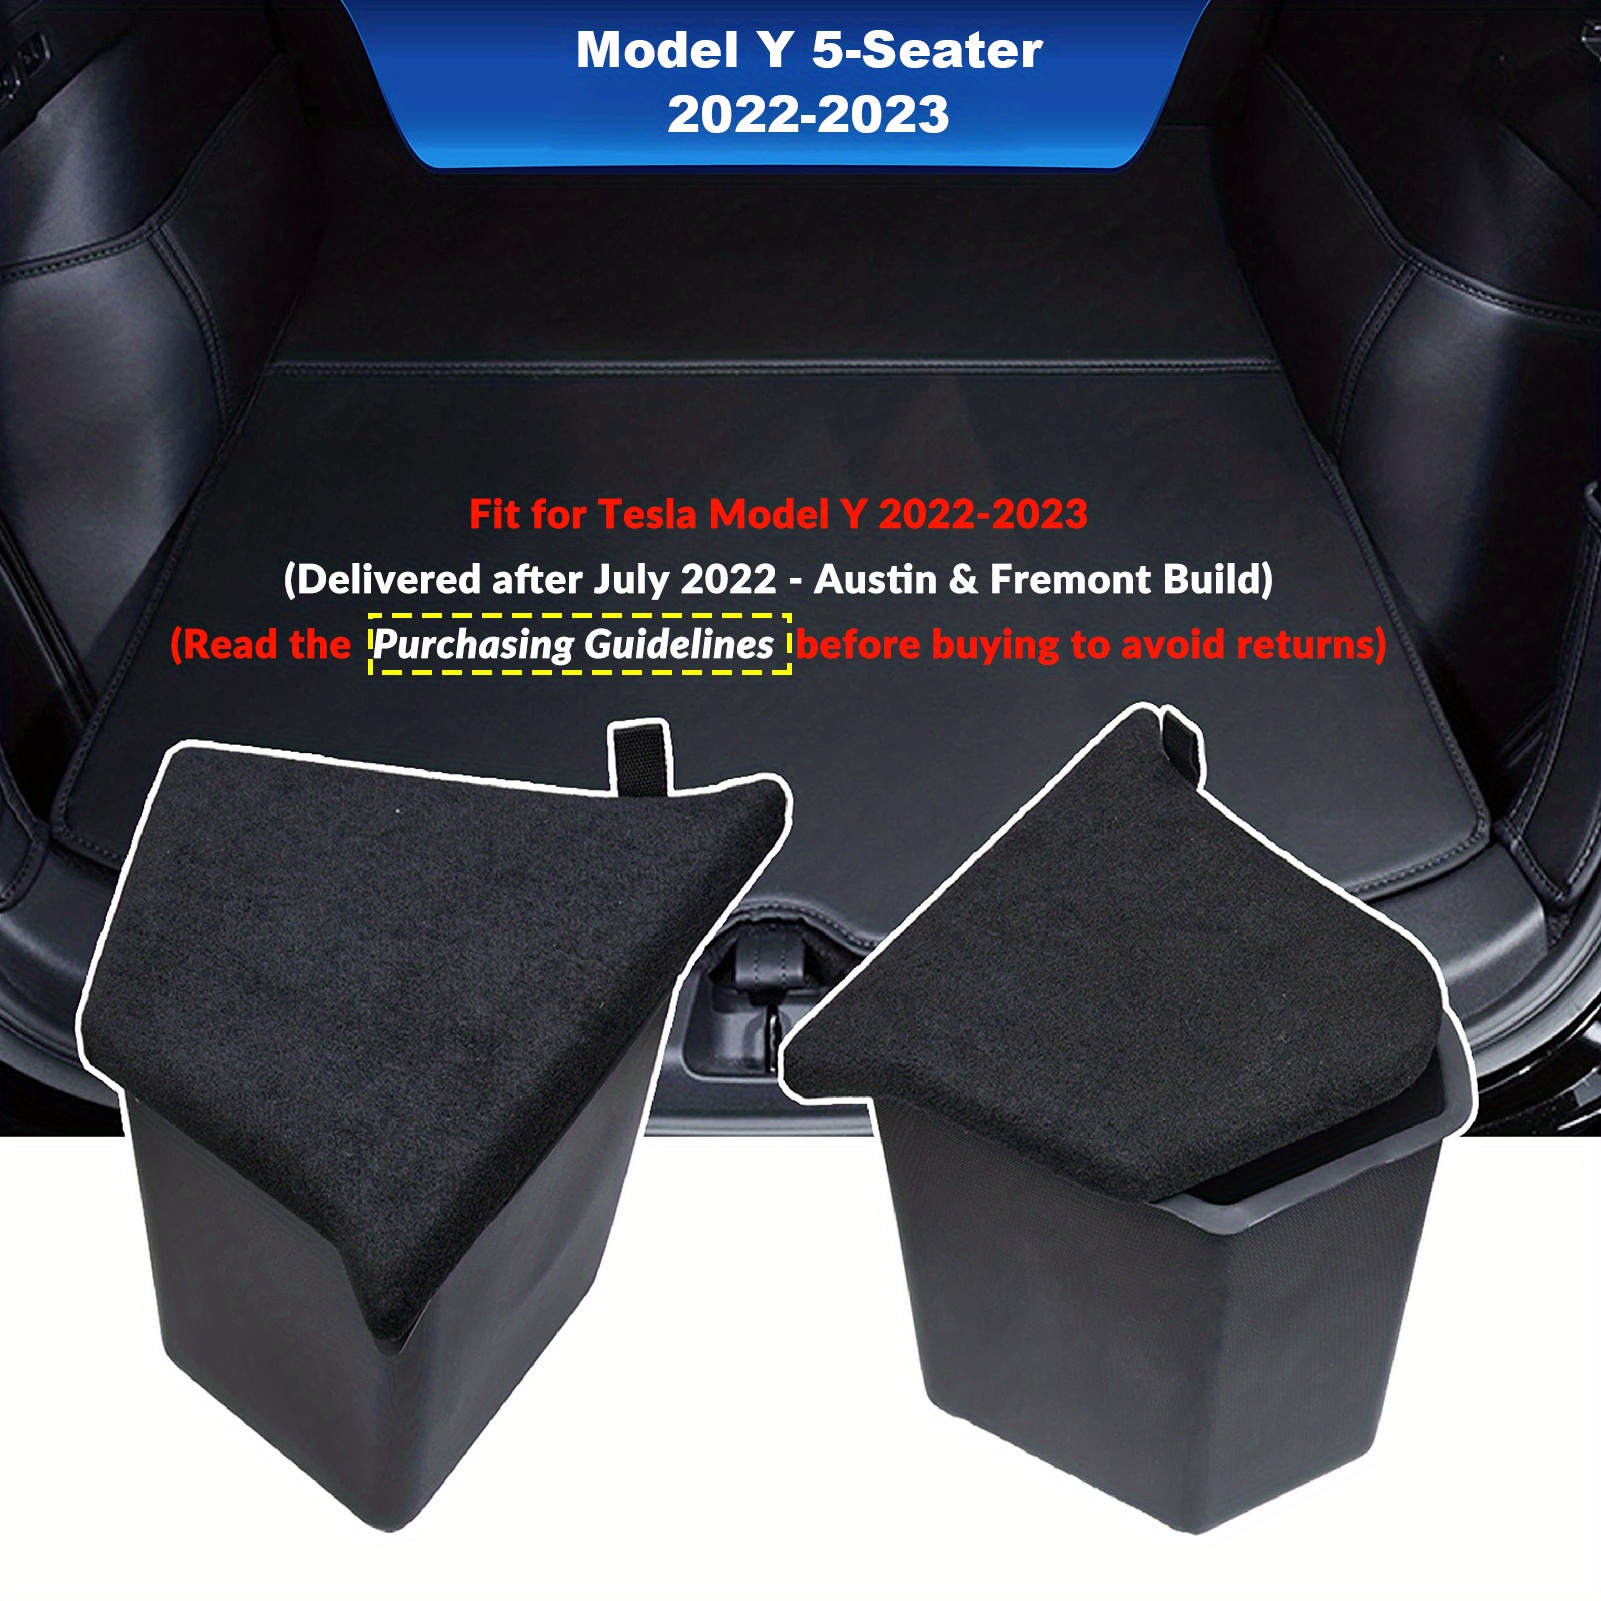  BASENOR 2020-2021 Tesla Model Y Trunk Organizer Waterproof Rear  Trunk Storage Bins Side Box with Carpeted Lip Interior Accessories Set of 2  for 5-Seater : Automotive